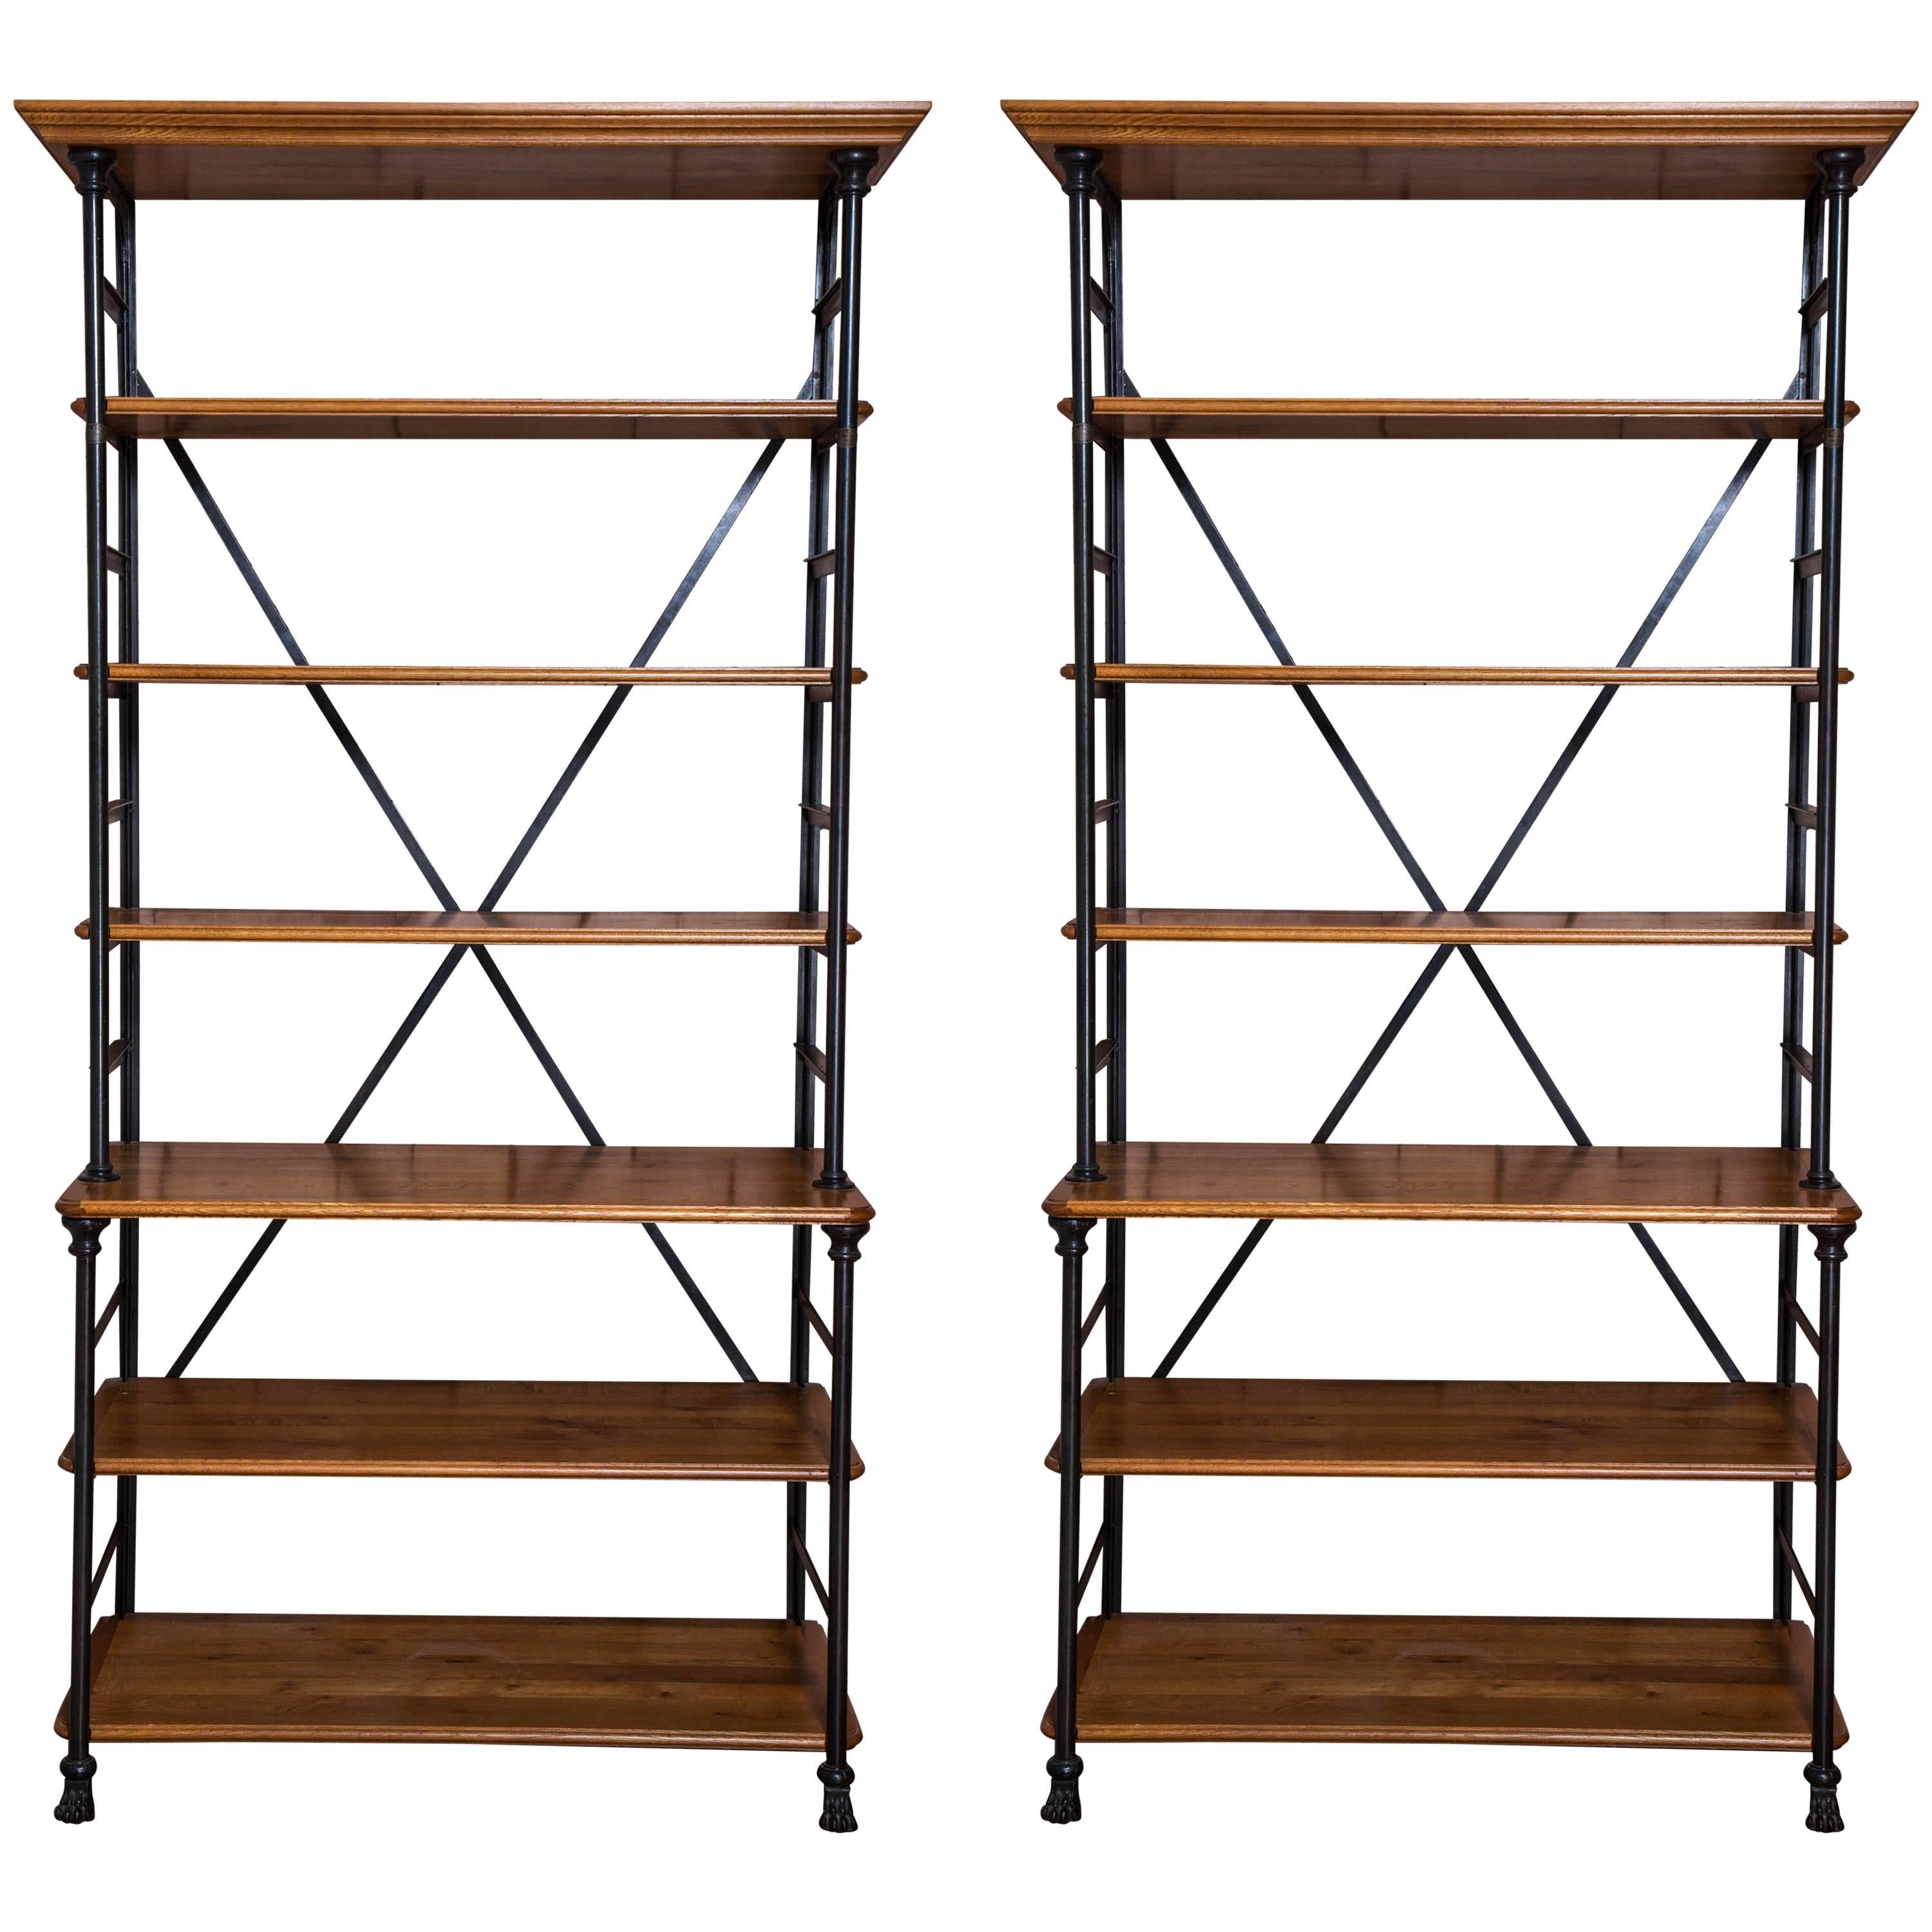 Pair of French Provincial Style Baker's Racks